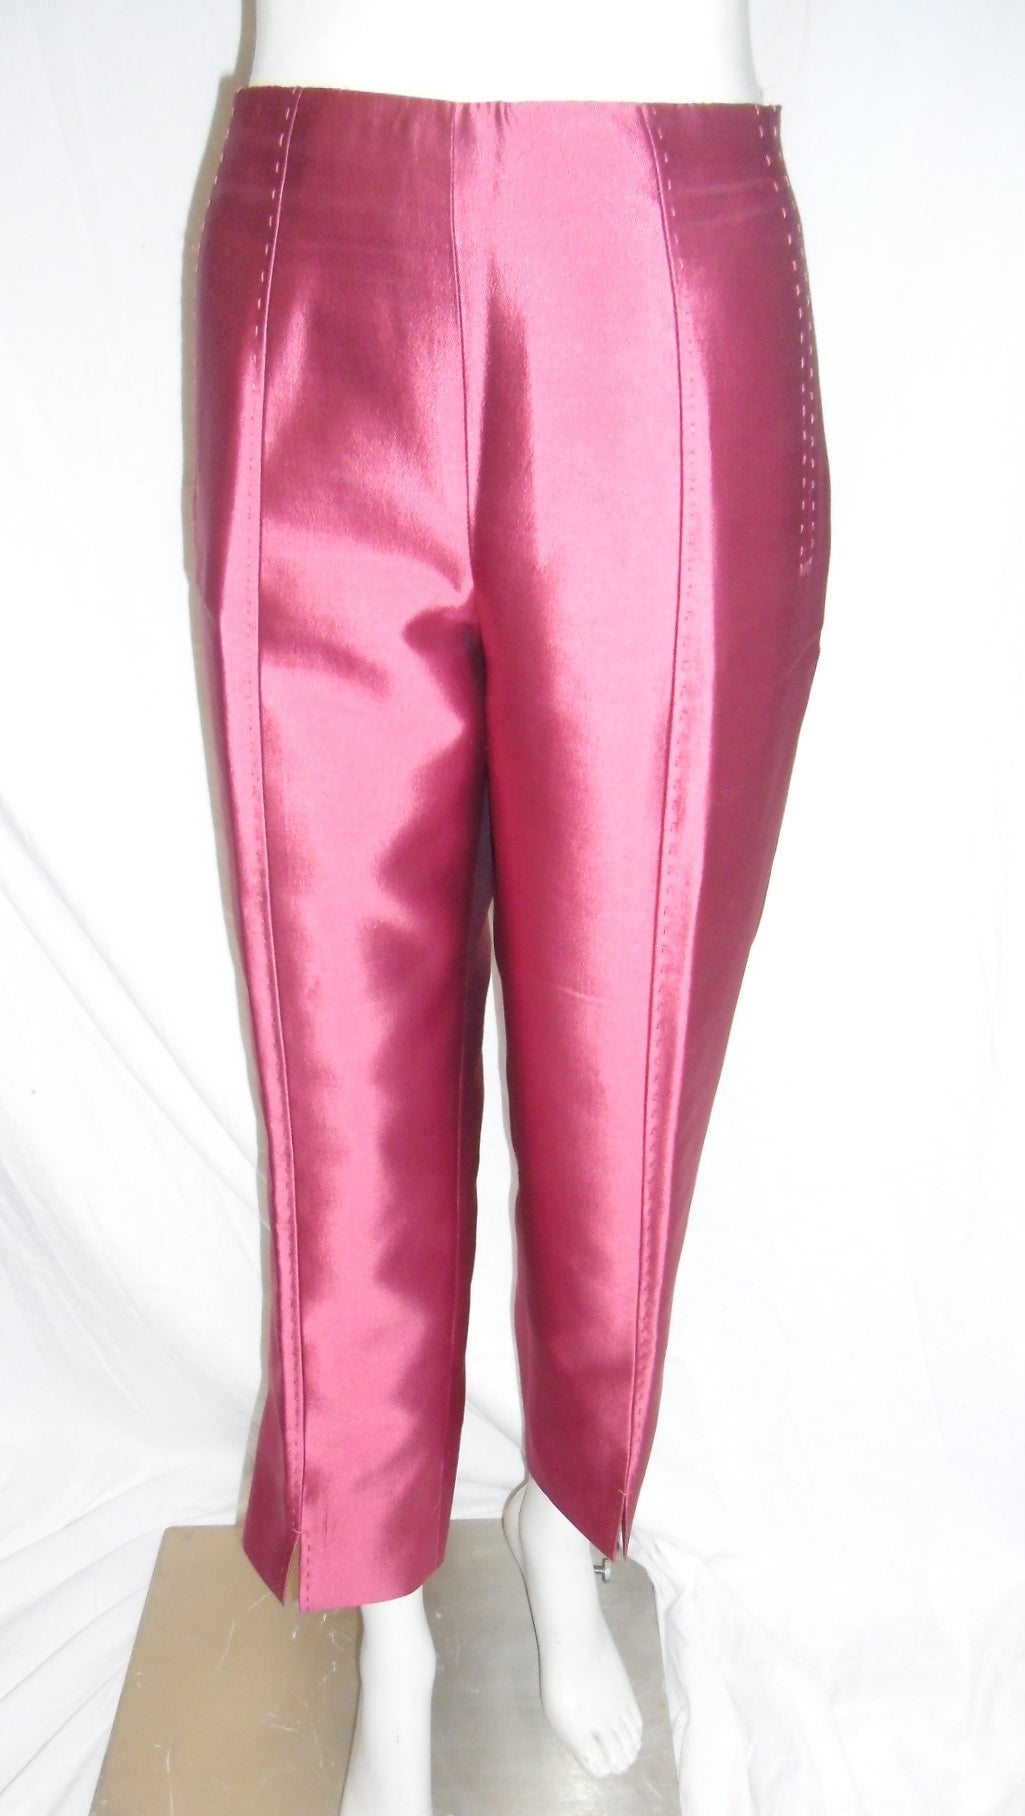 Chado Ralph Rucci new Stunning evening pant suit sz 10 For Sale 5